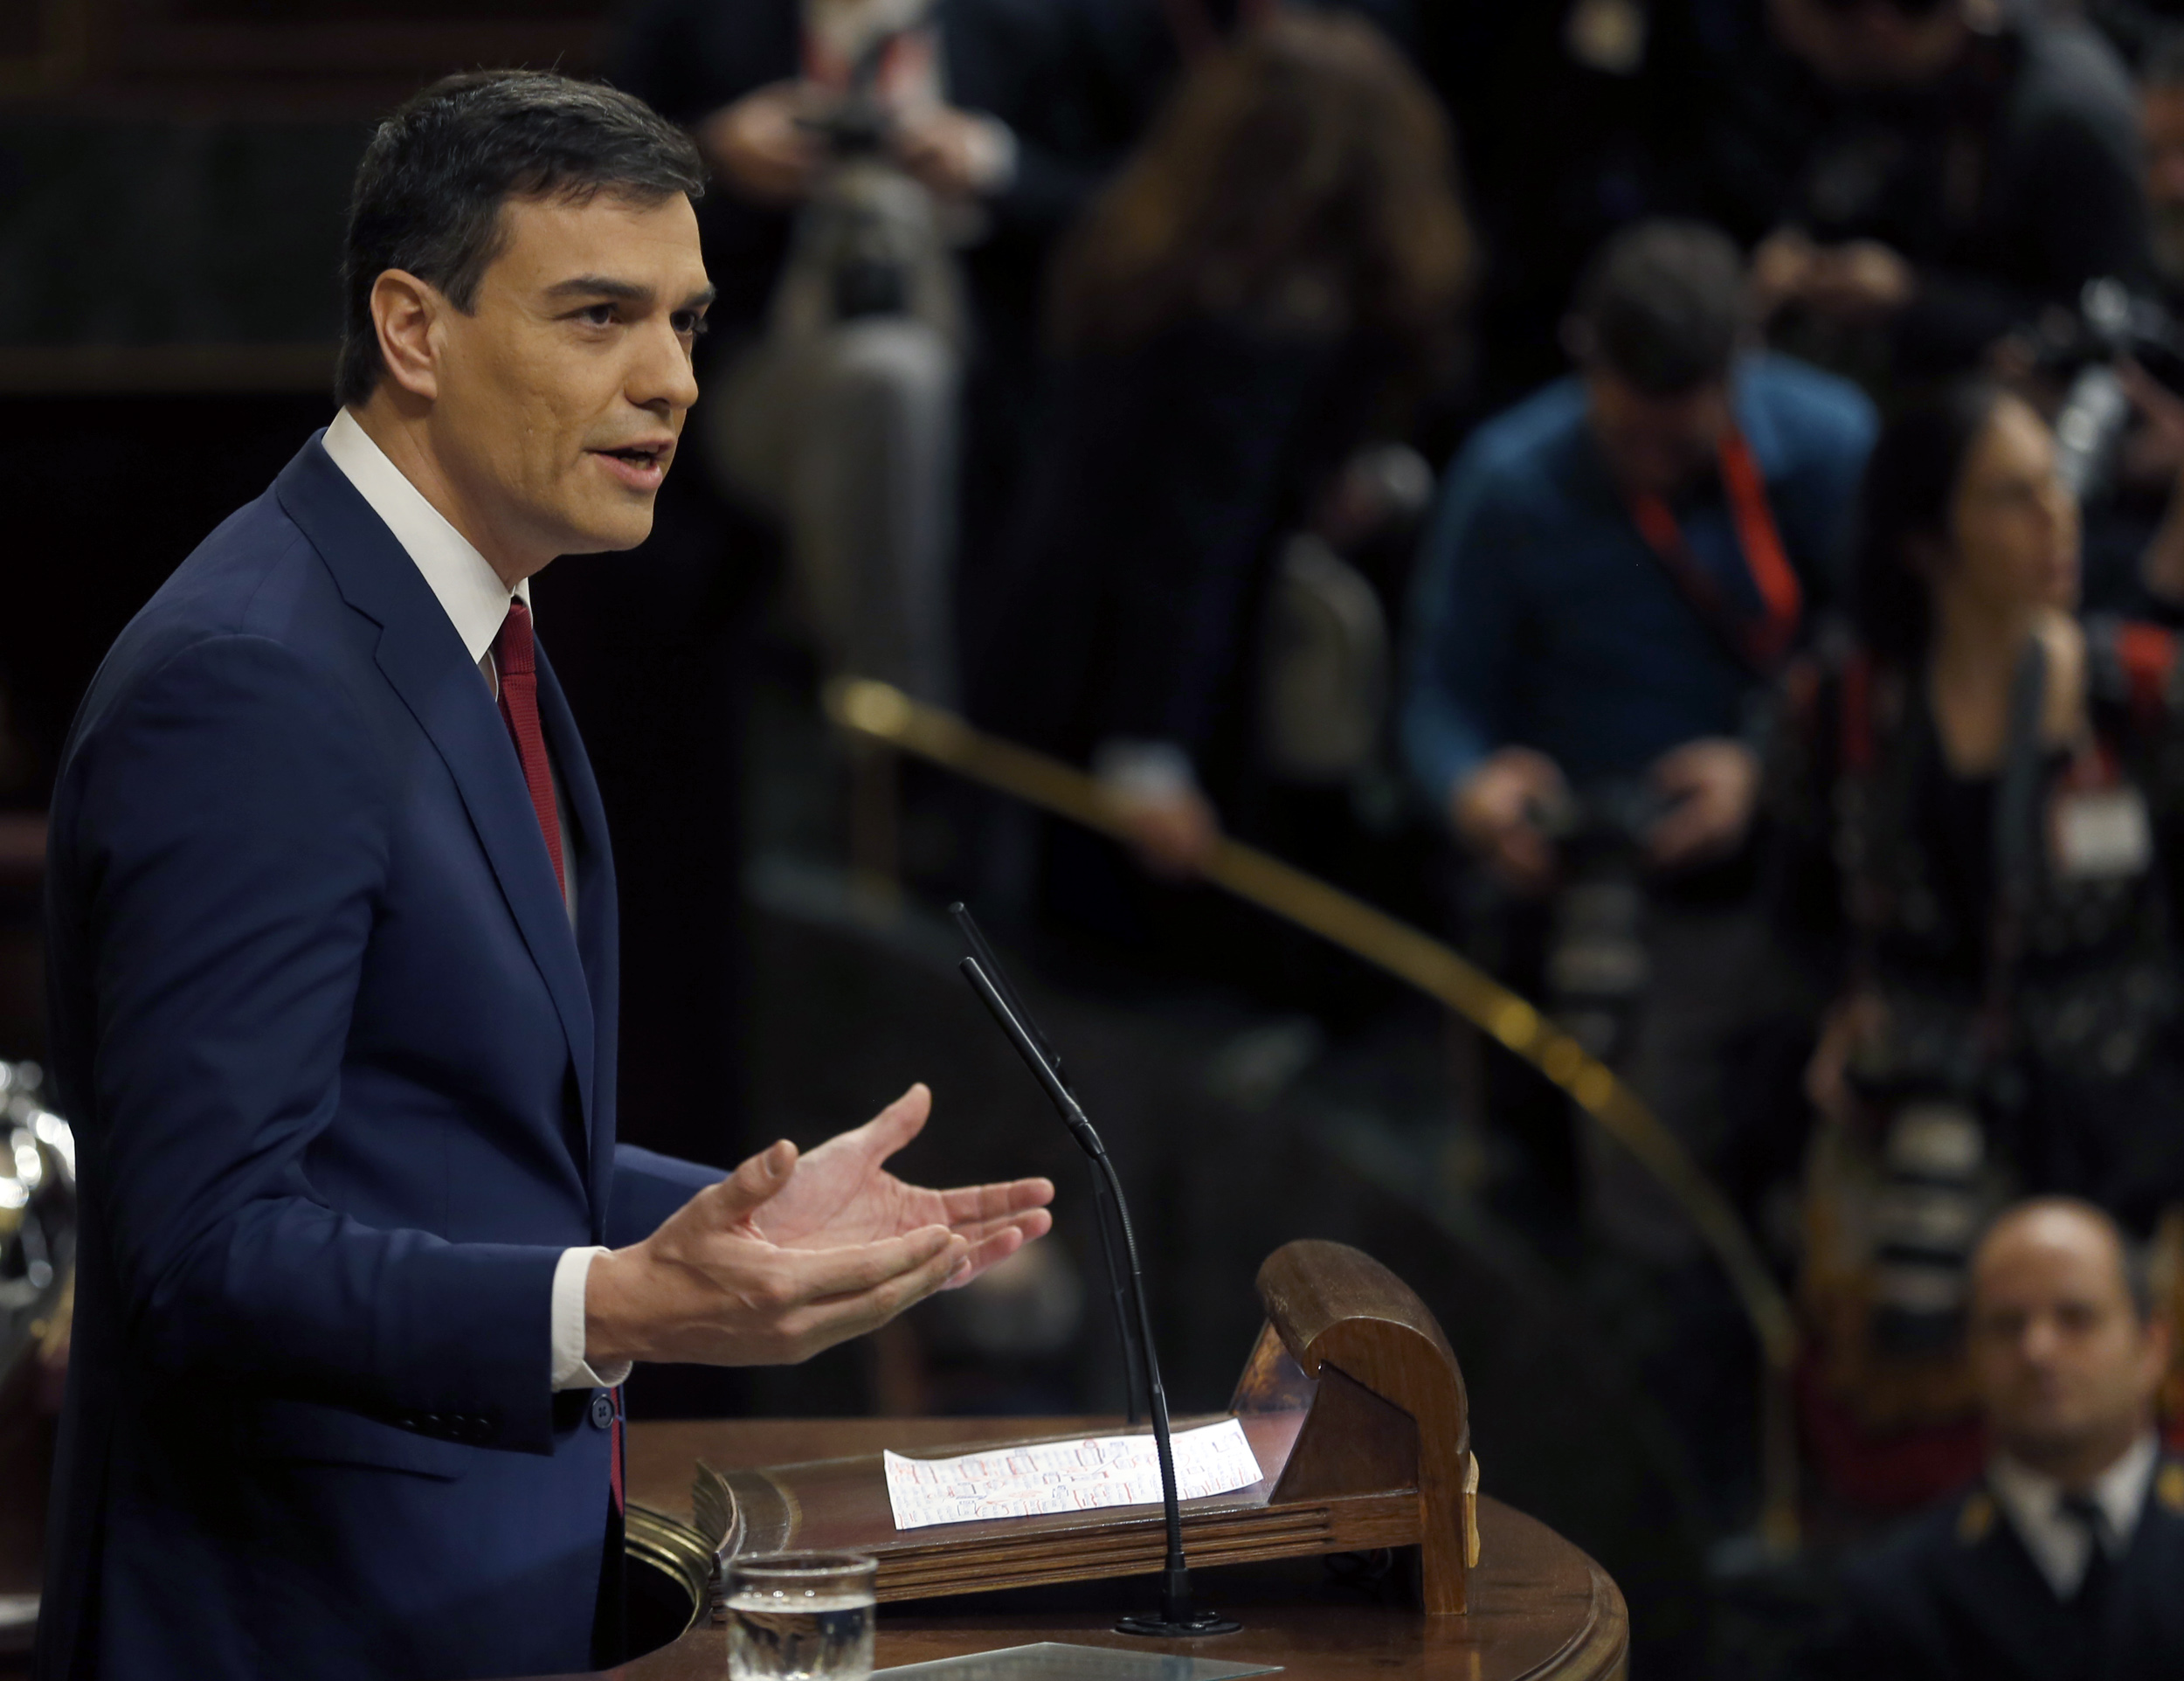 PSOE's leader, Pedro Sánchez is the candidate to form a new government in Spain (by ACN)